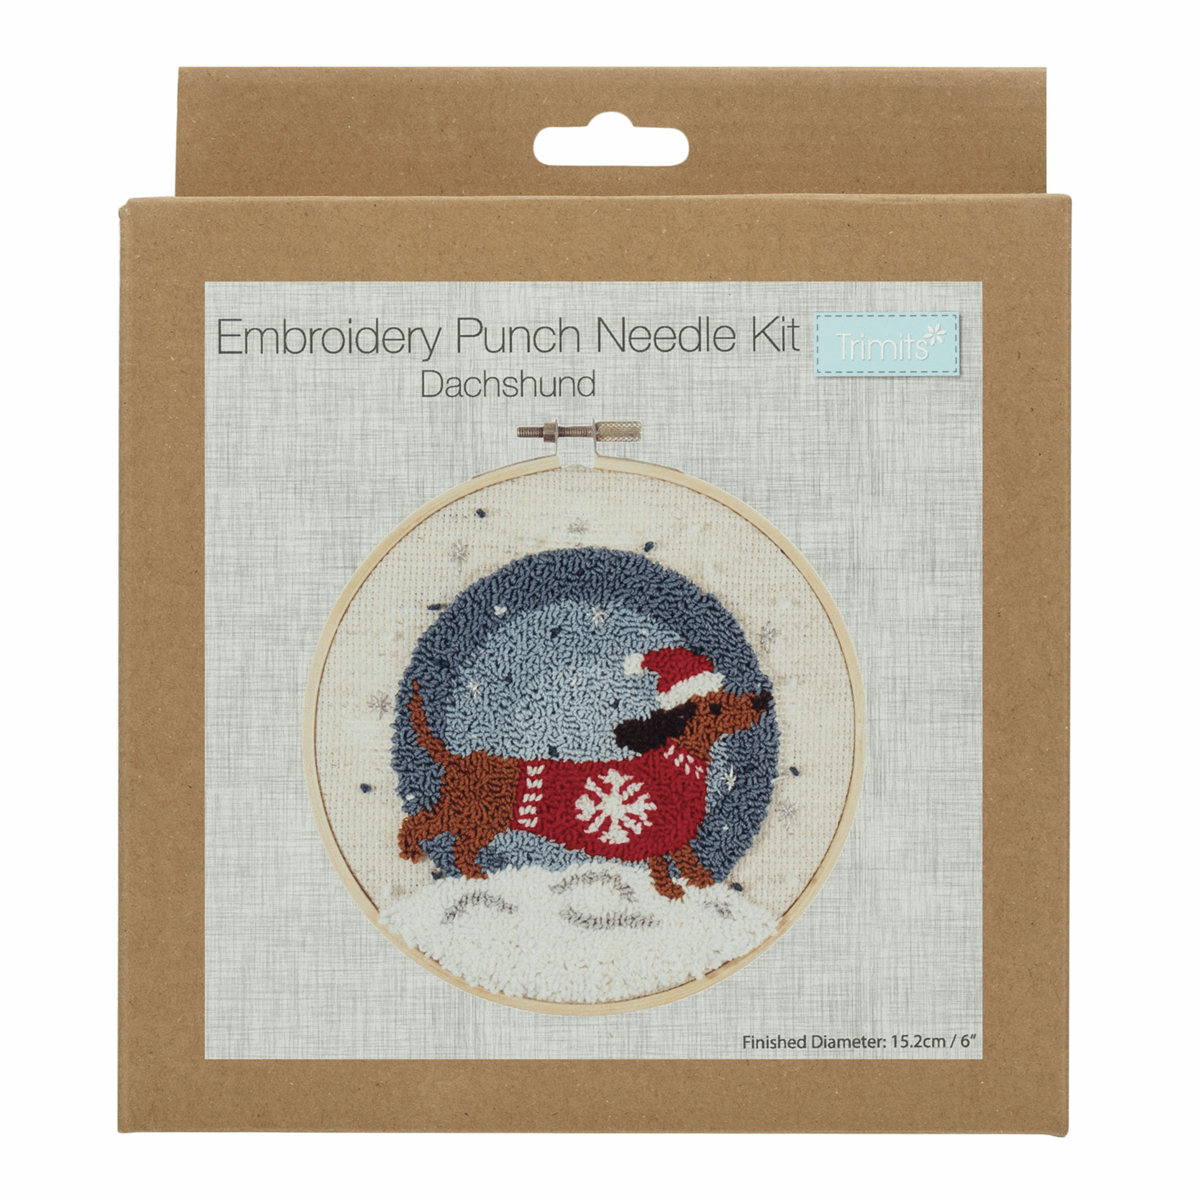  Punch Needle Kit: Floss and Hoop: Festive Dachshund